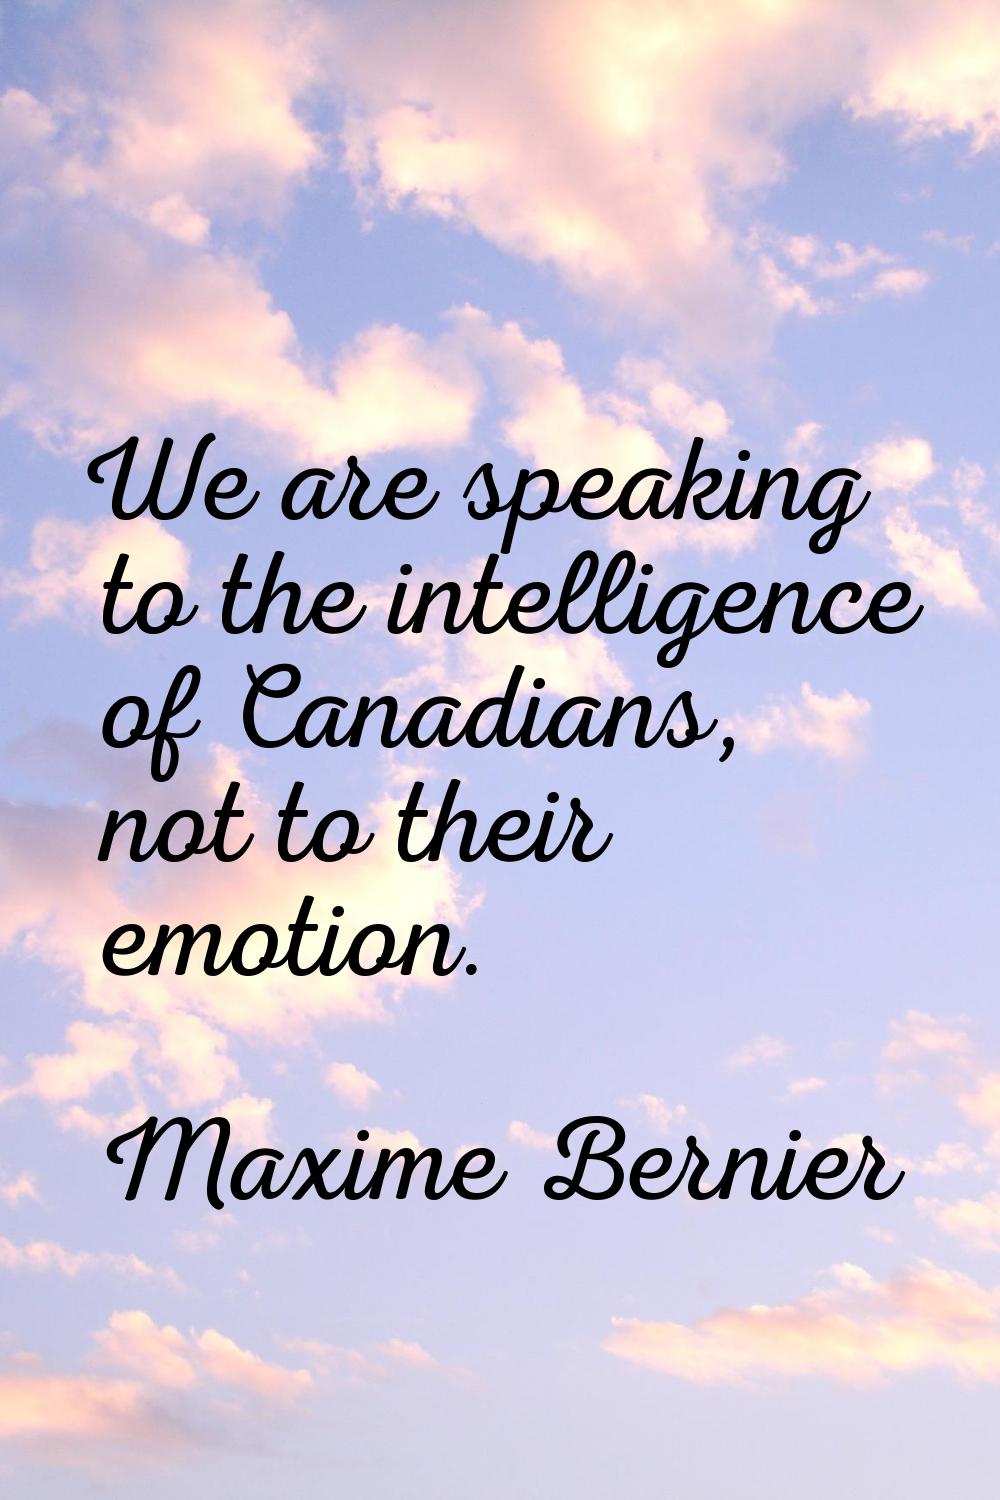 We are speaking to the intelligence of Canadians, not to their emotion.